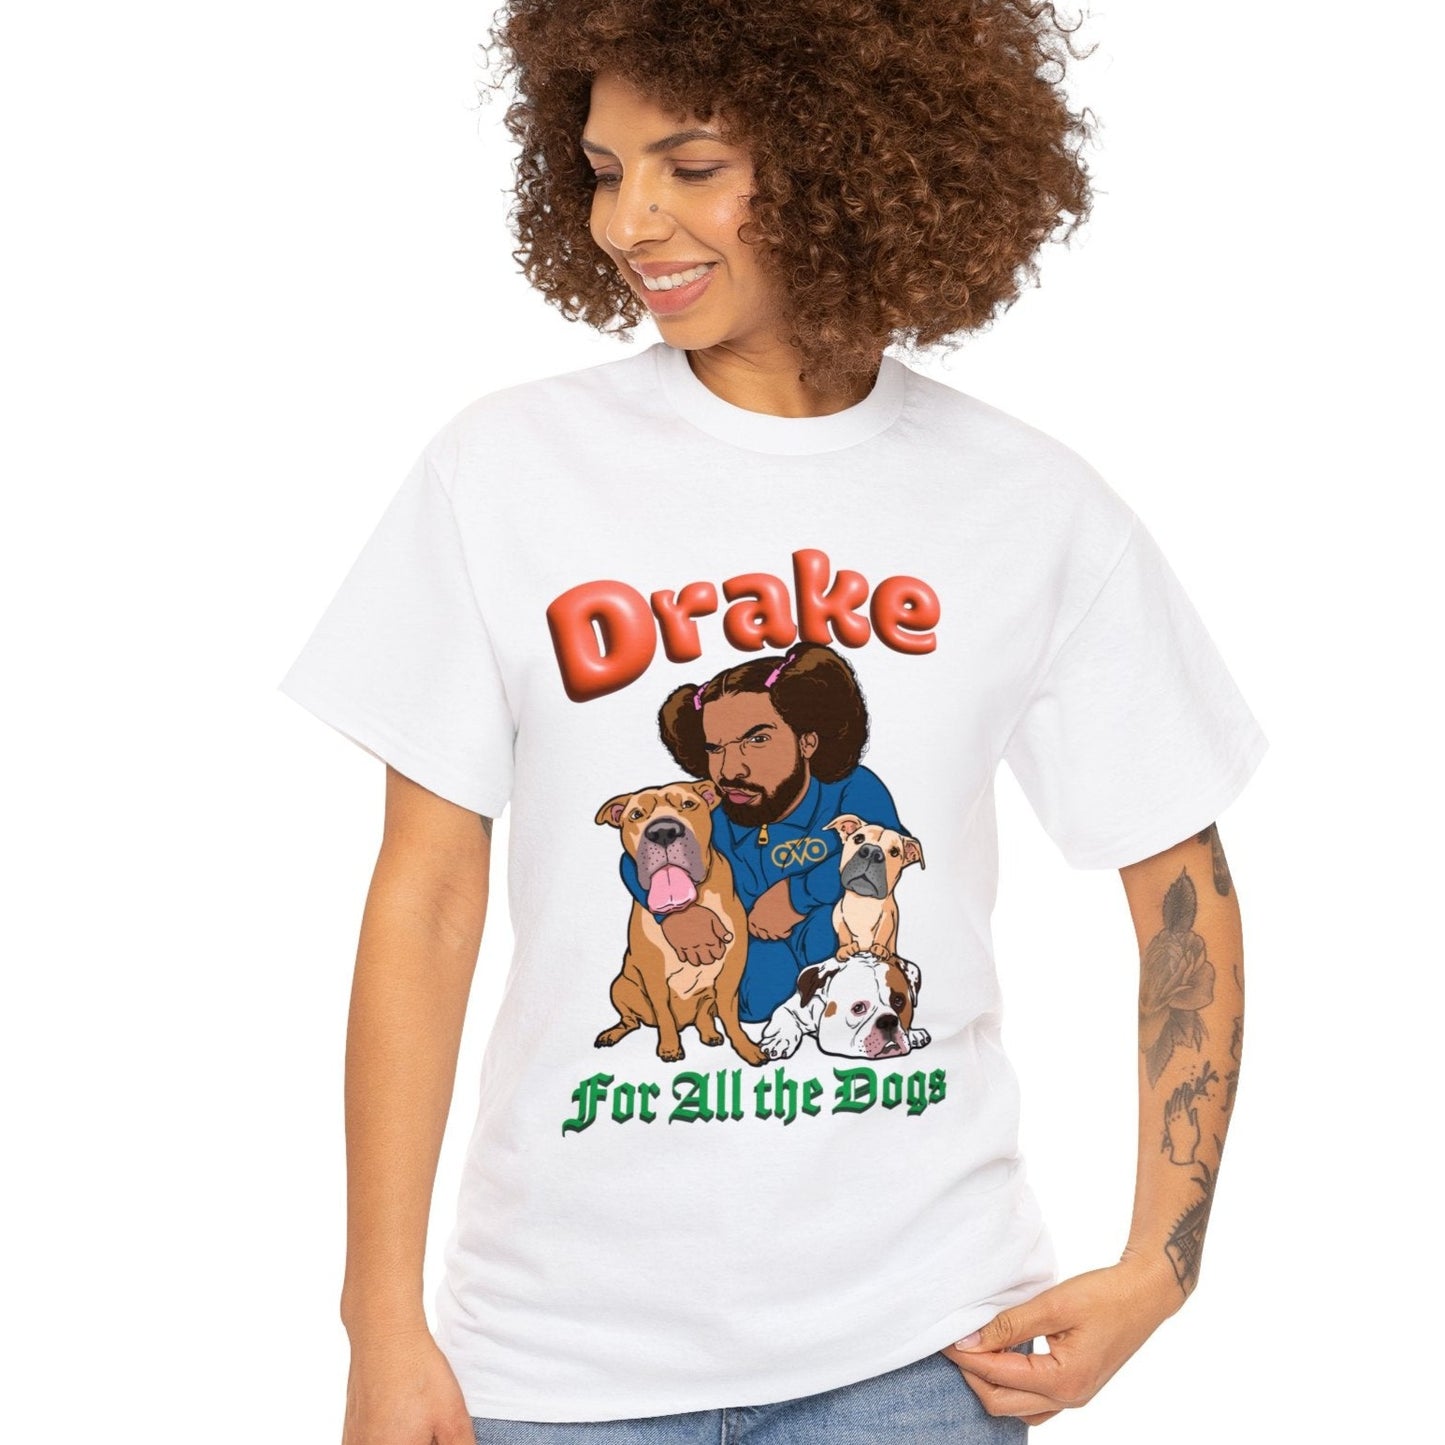 Drake T-Shirt - For All The Dogs